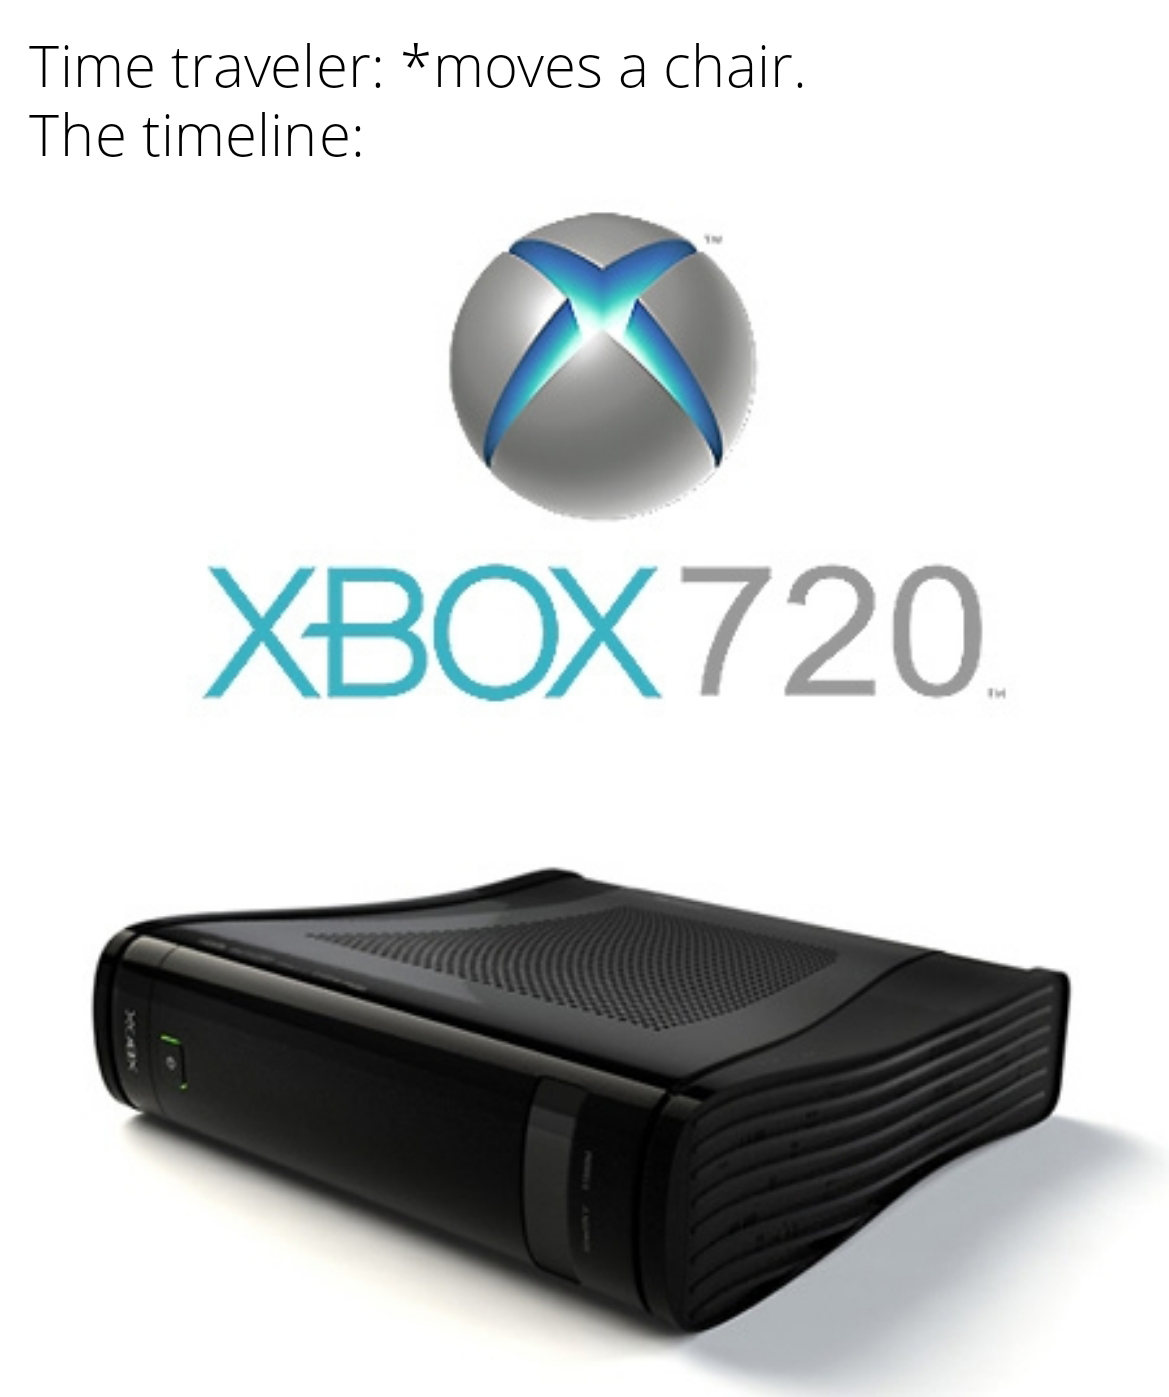 xbox 360 - Time traveler moves a chair. The timeline XBOX720